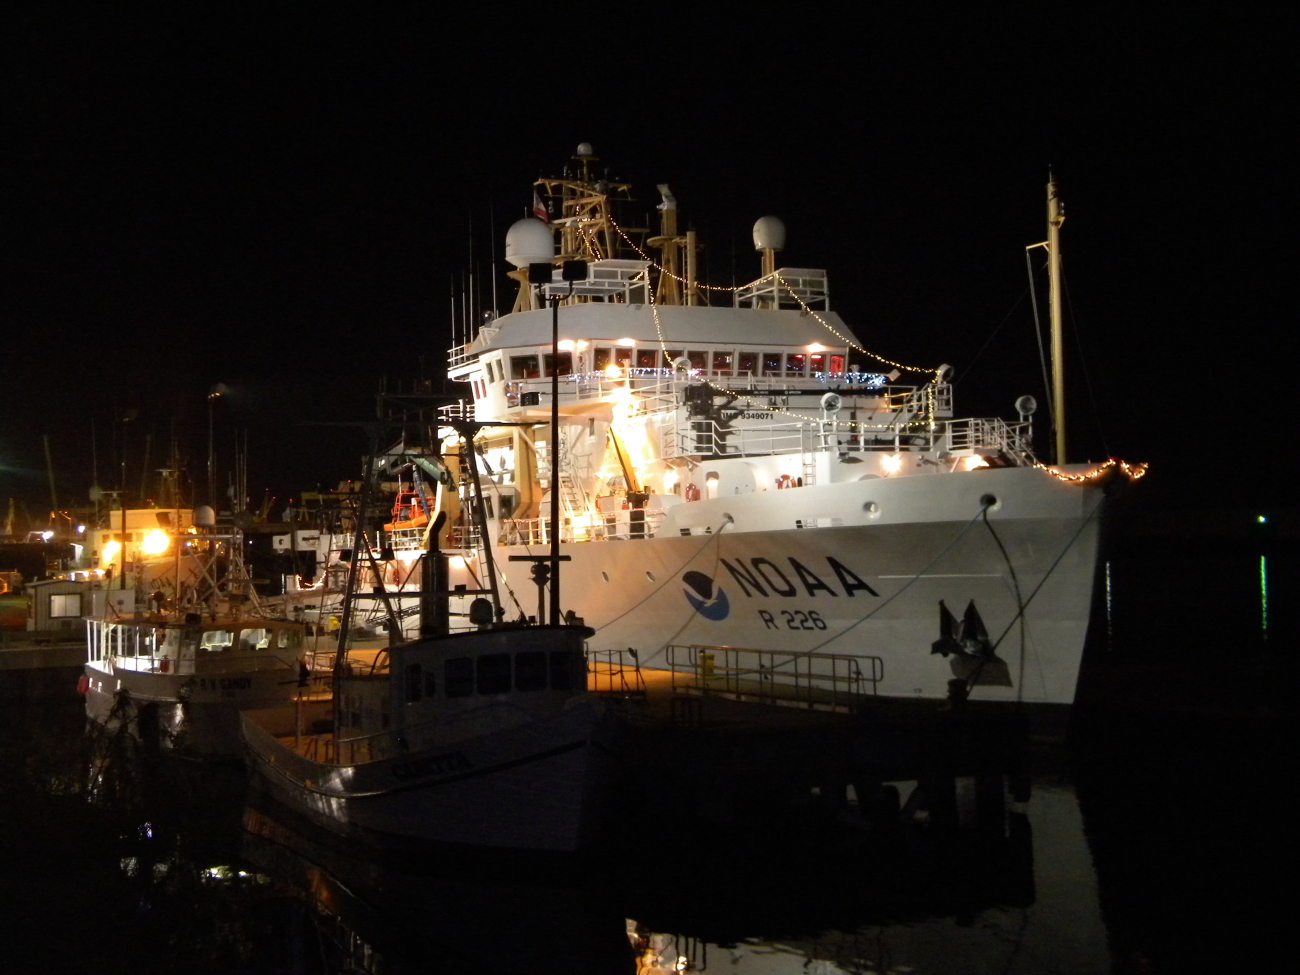 NOAA Ship PISCES at the pier at Pascagoula dressed in holiday lighting